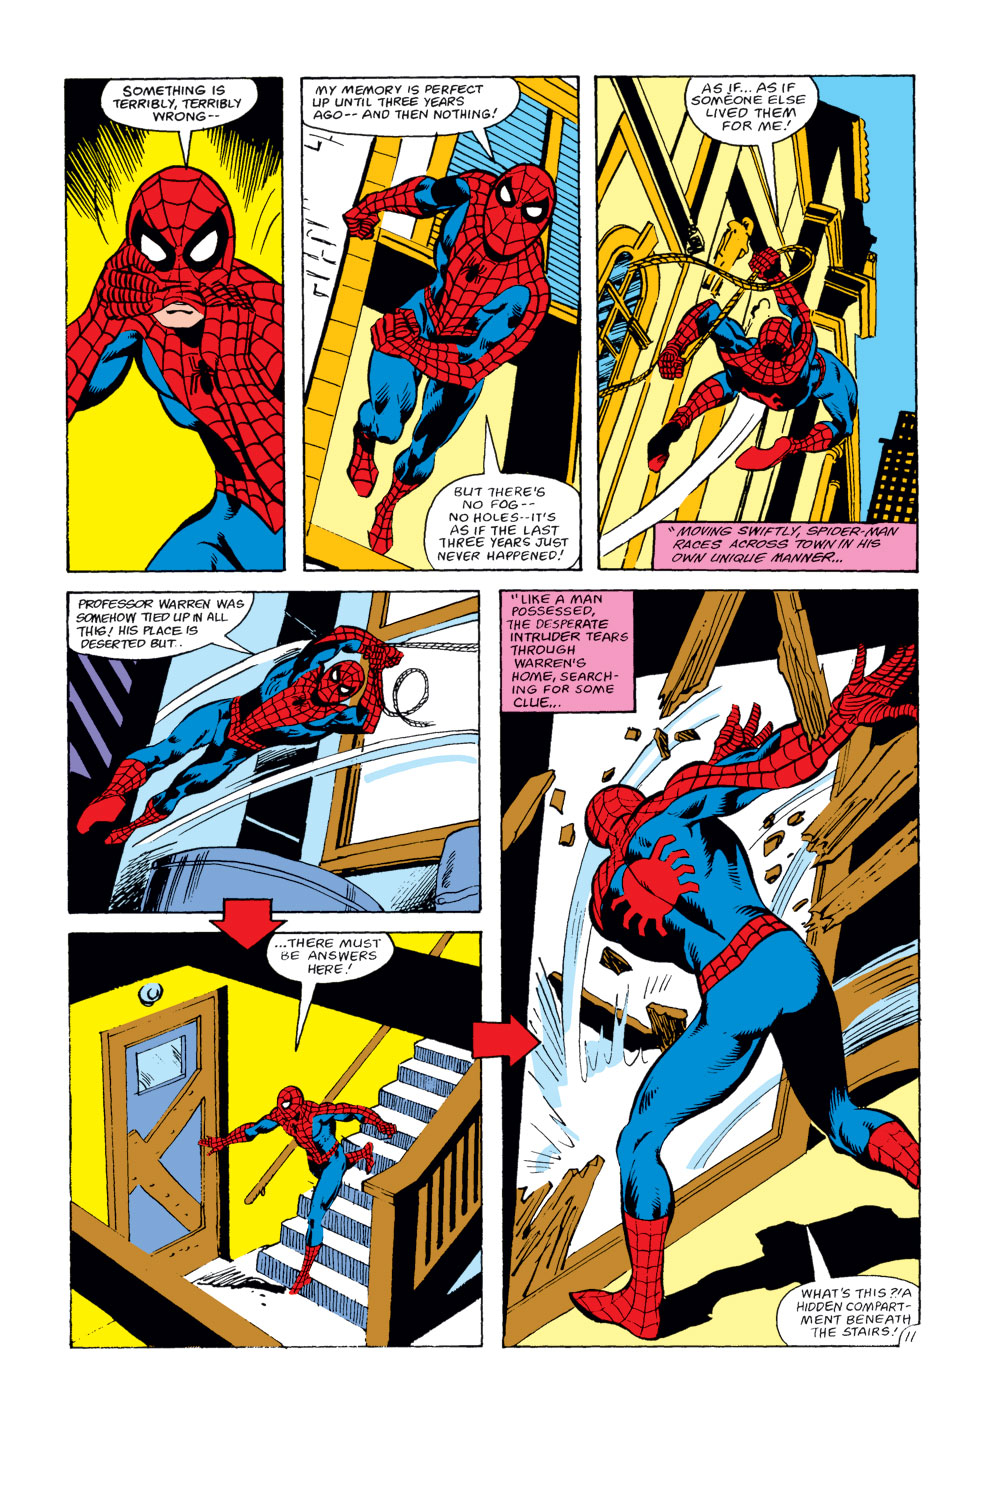 What If? (1977) issue 30 - Spider-Man's clone lived - Page 12